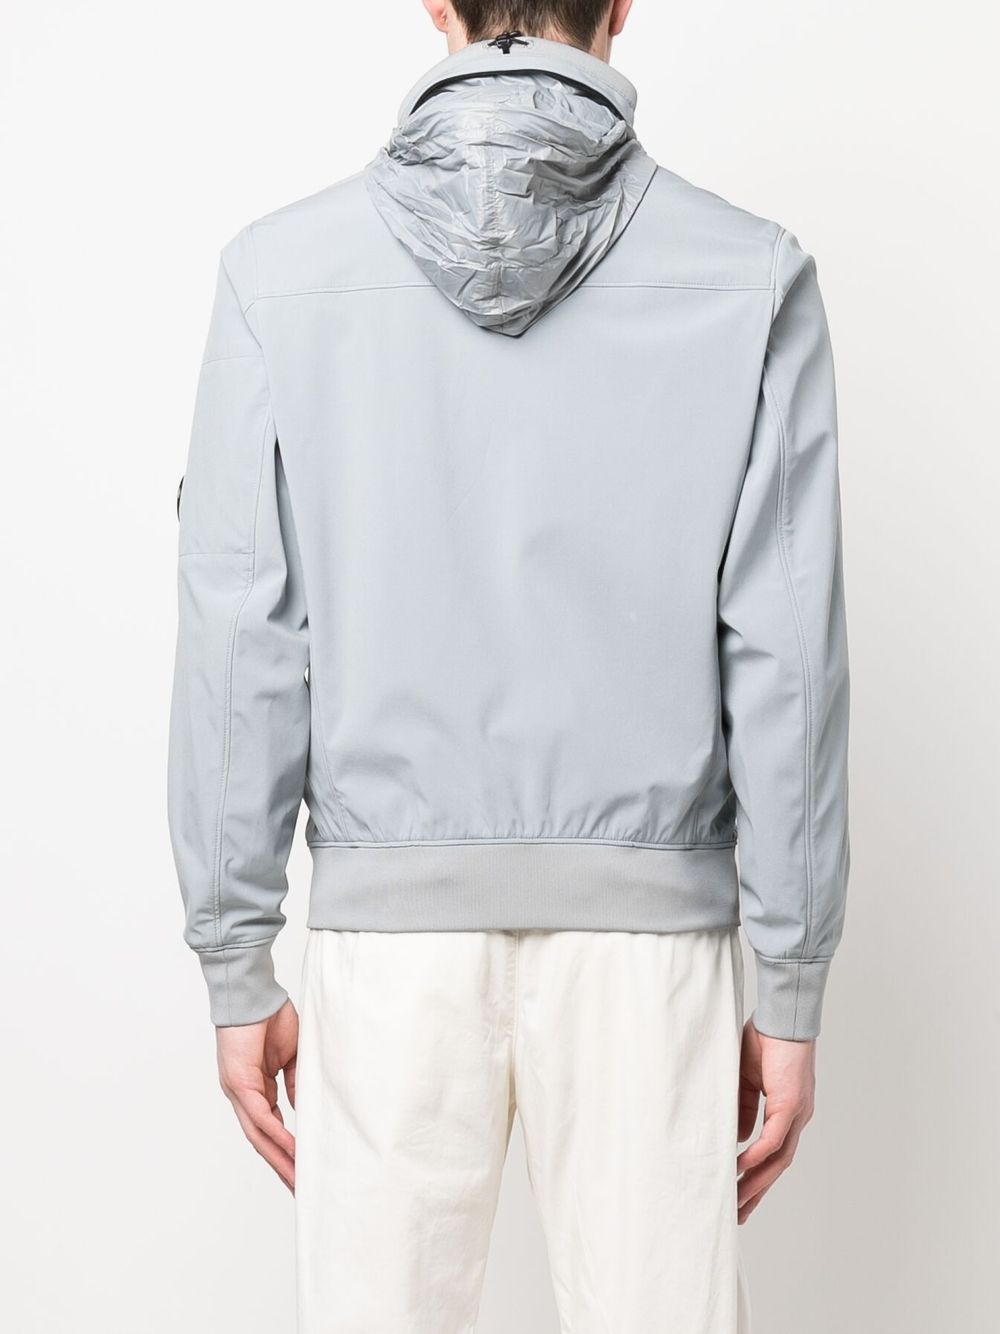 C.P. Company concealed-hood zip-up Jacket - Farfetch